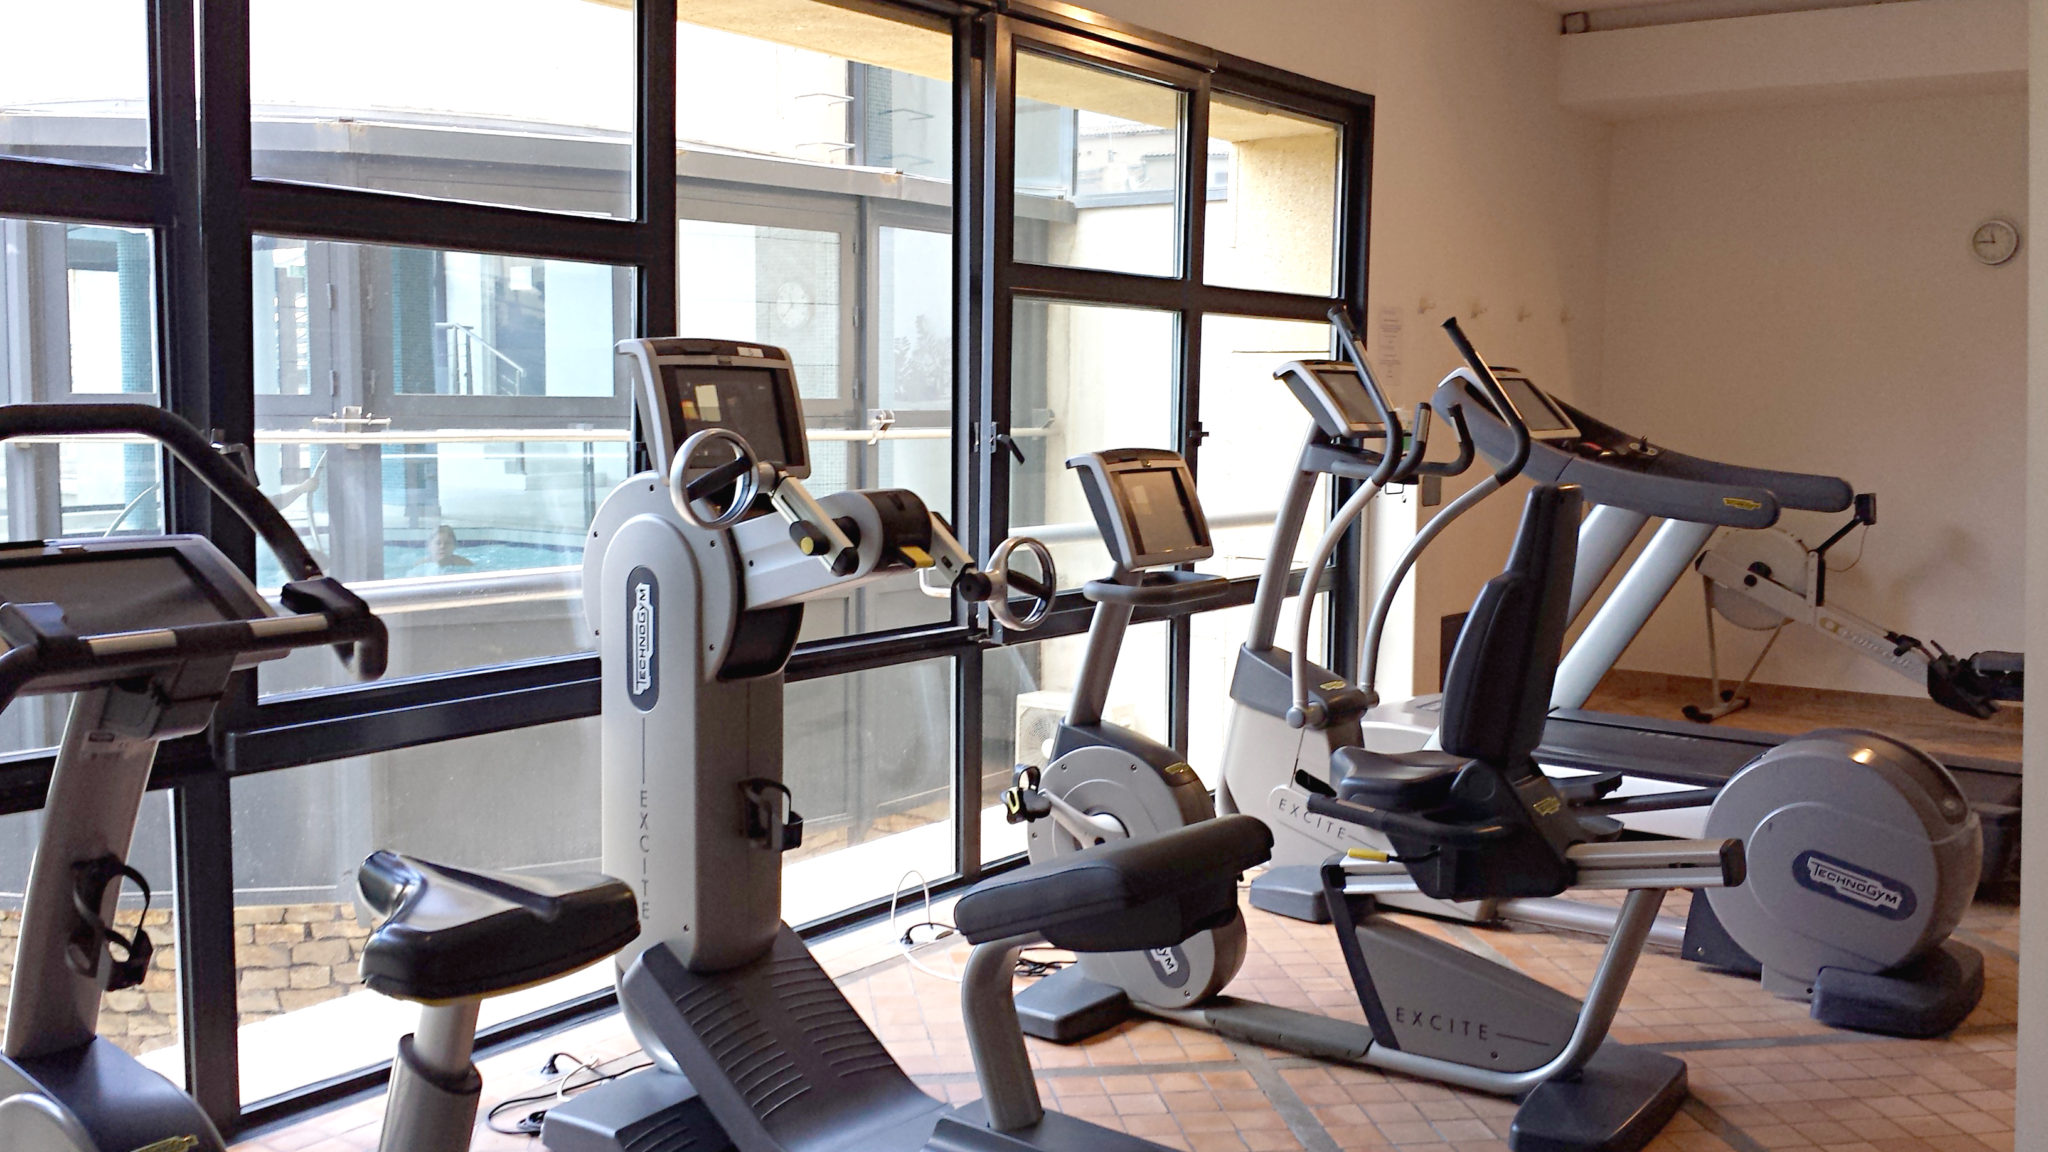 Journee_cocooning_aixenprovence_spa_thermes_sextius_salle_sport_cardio